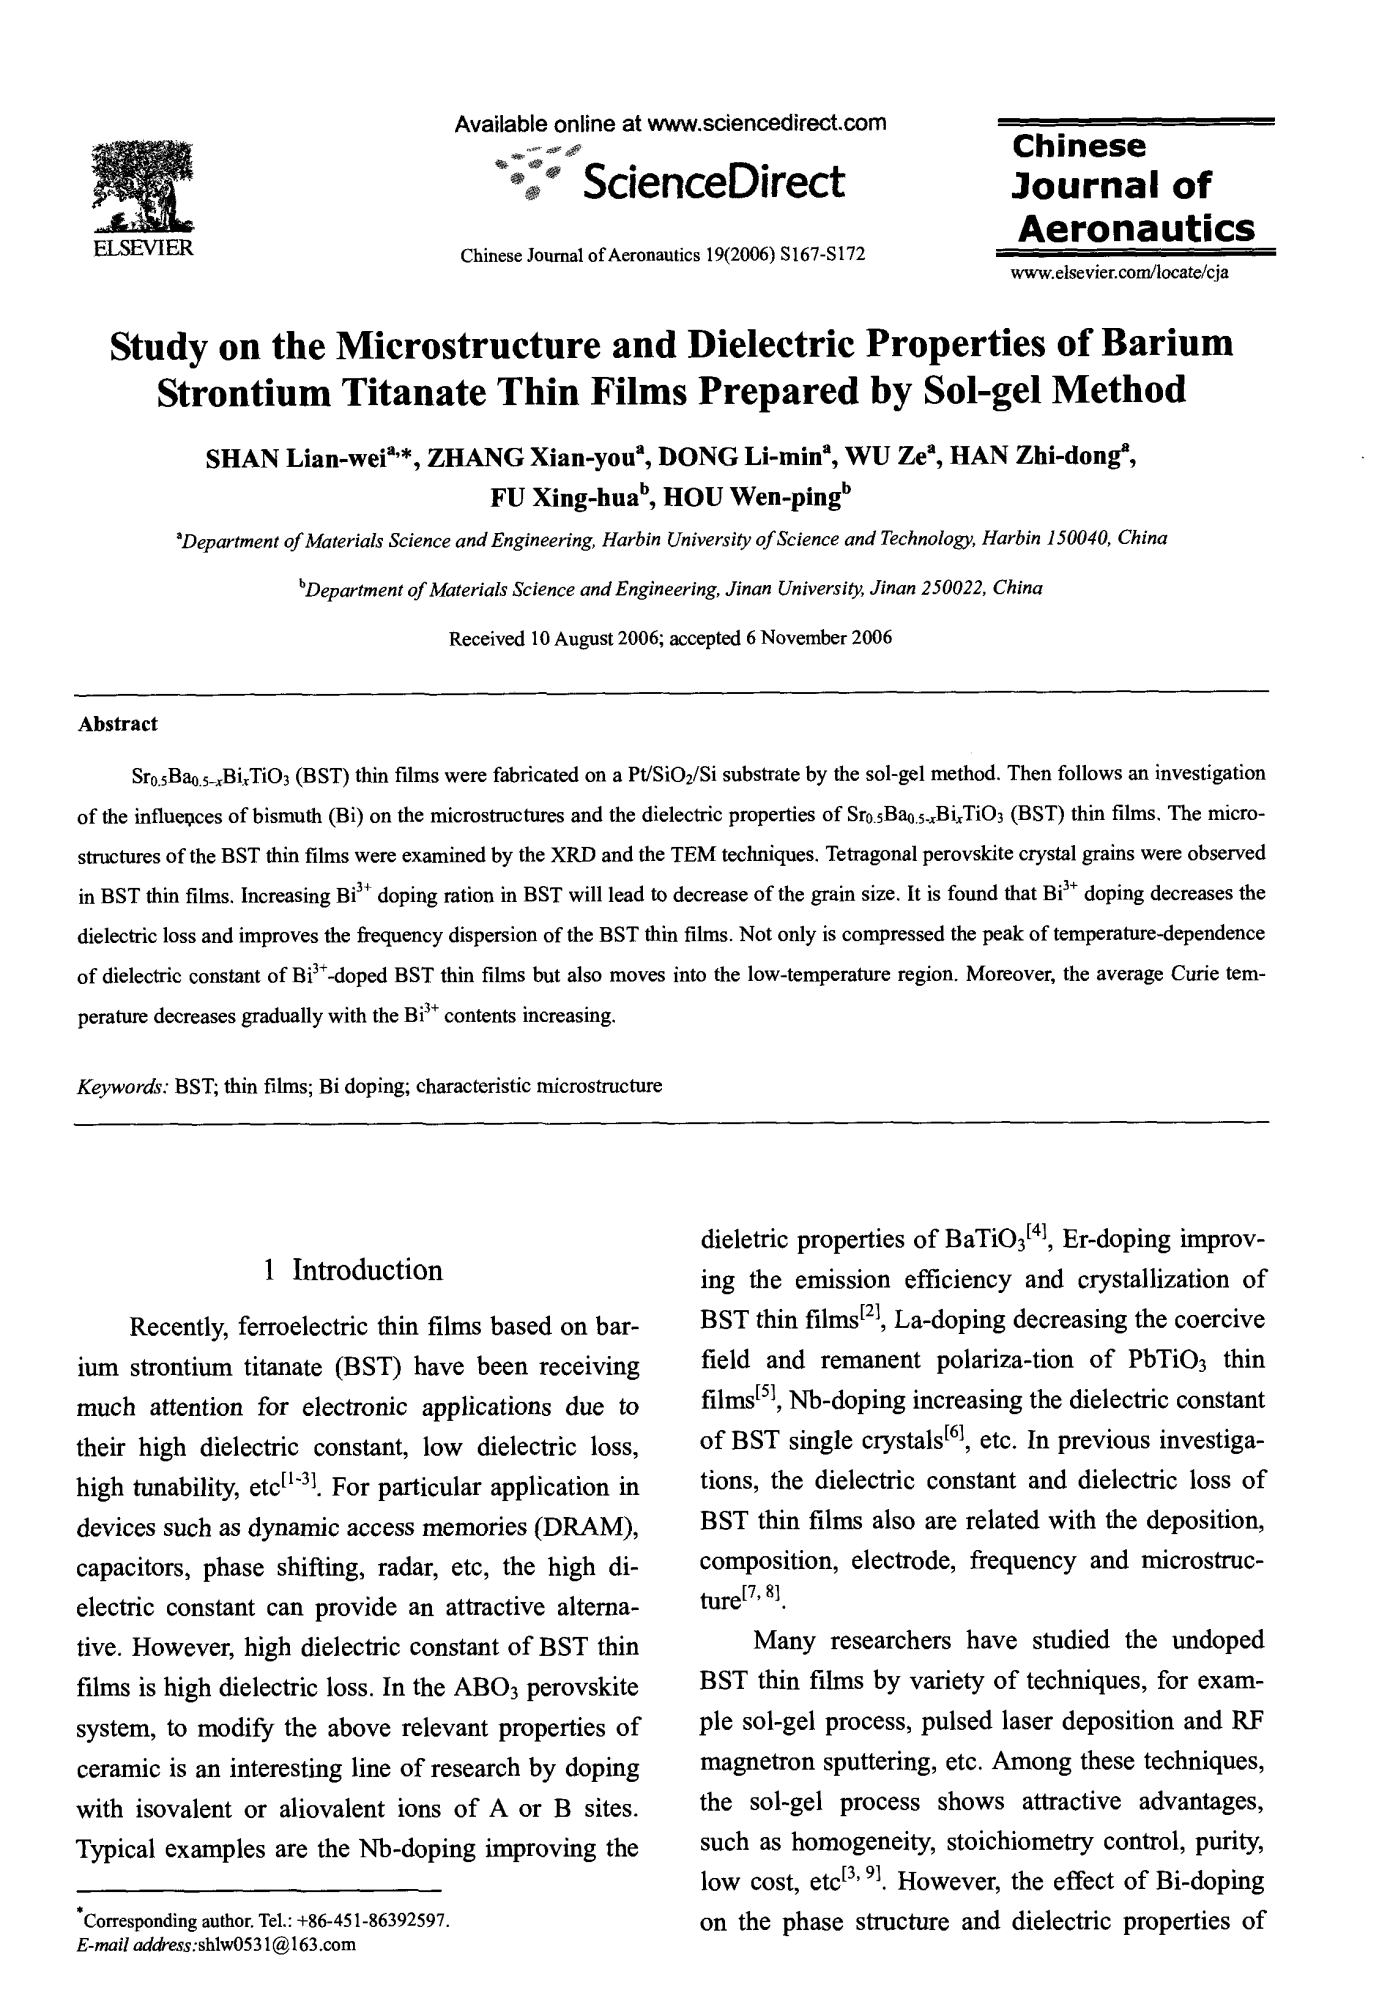 Study on the Microstructure and Dielectric Properties of Barium  Strontium Titanate Thin Films P